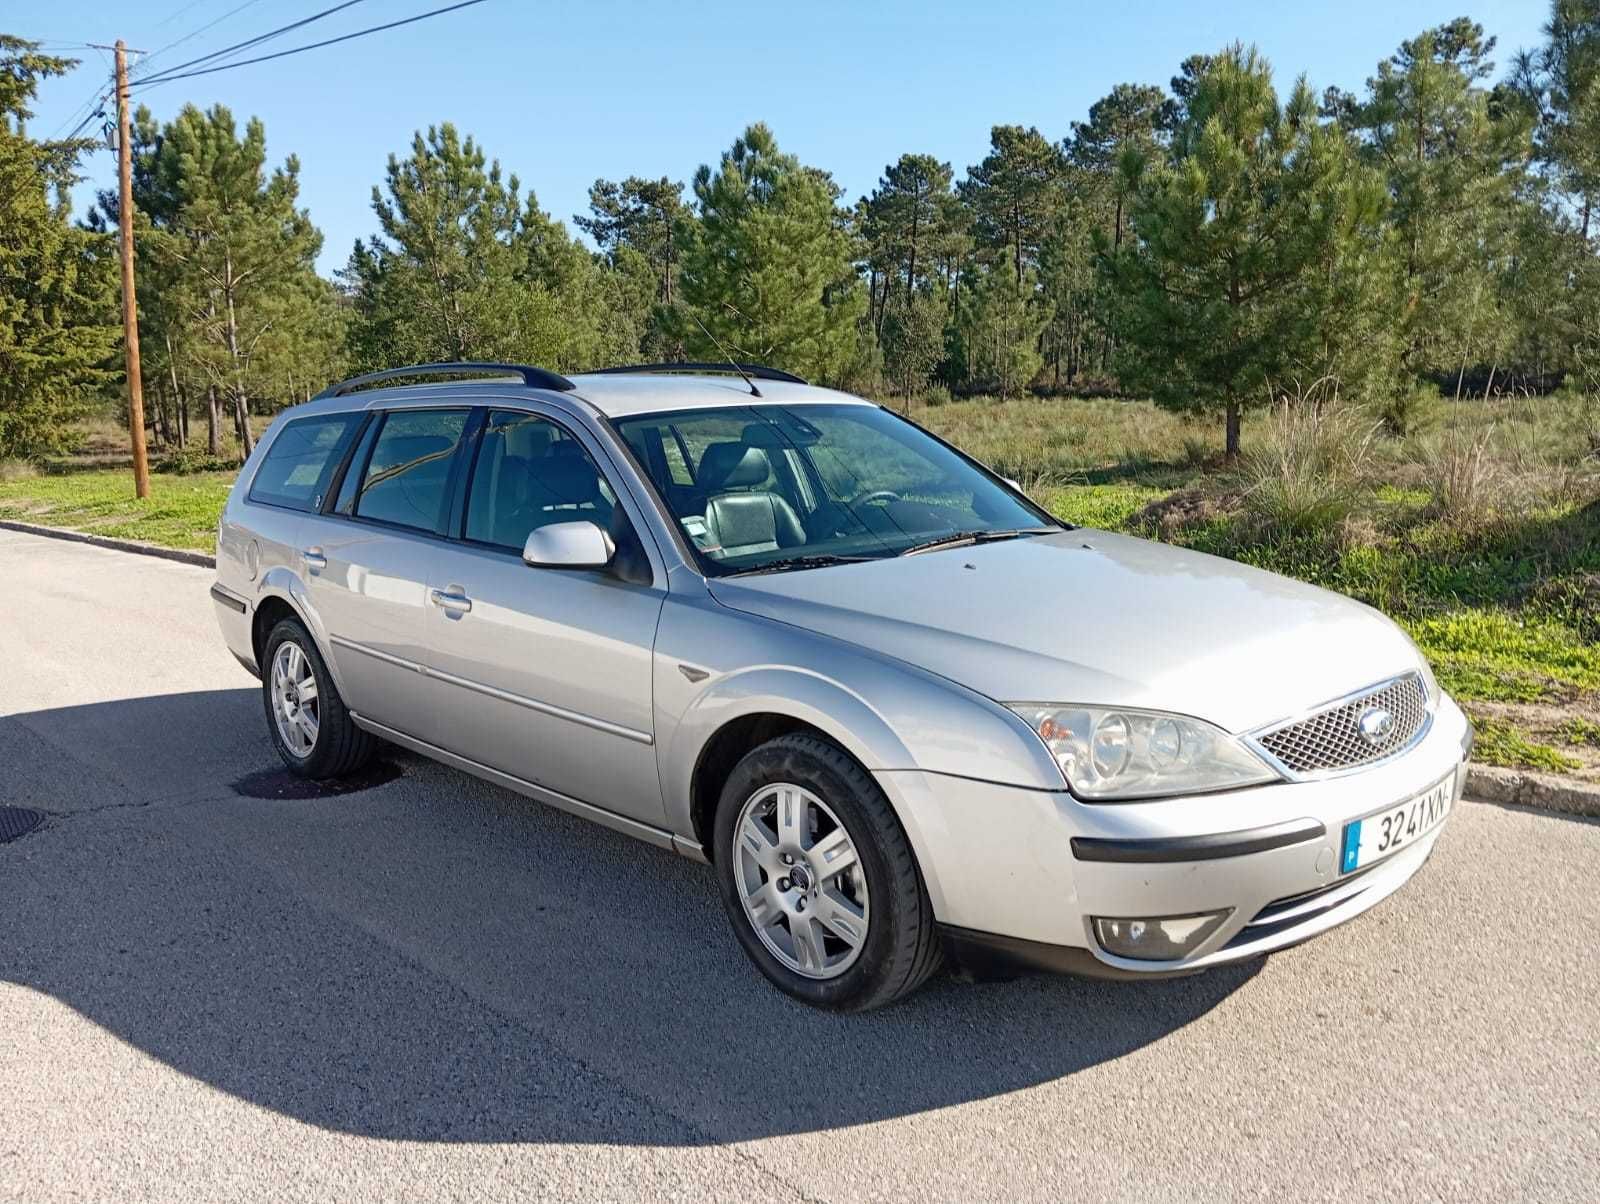 FORD MONDEO 2.0 guia tdci  turbo diesel  FULL EXTRAS